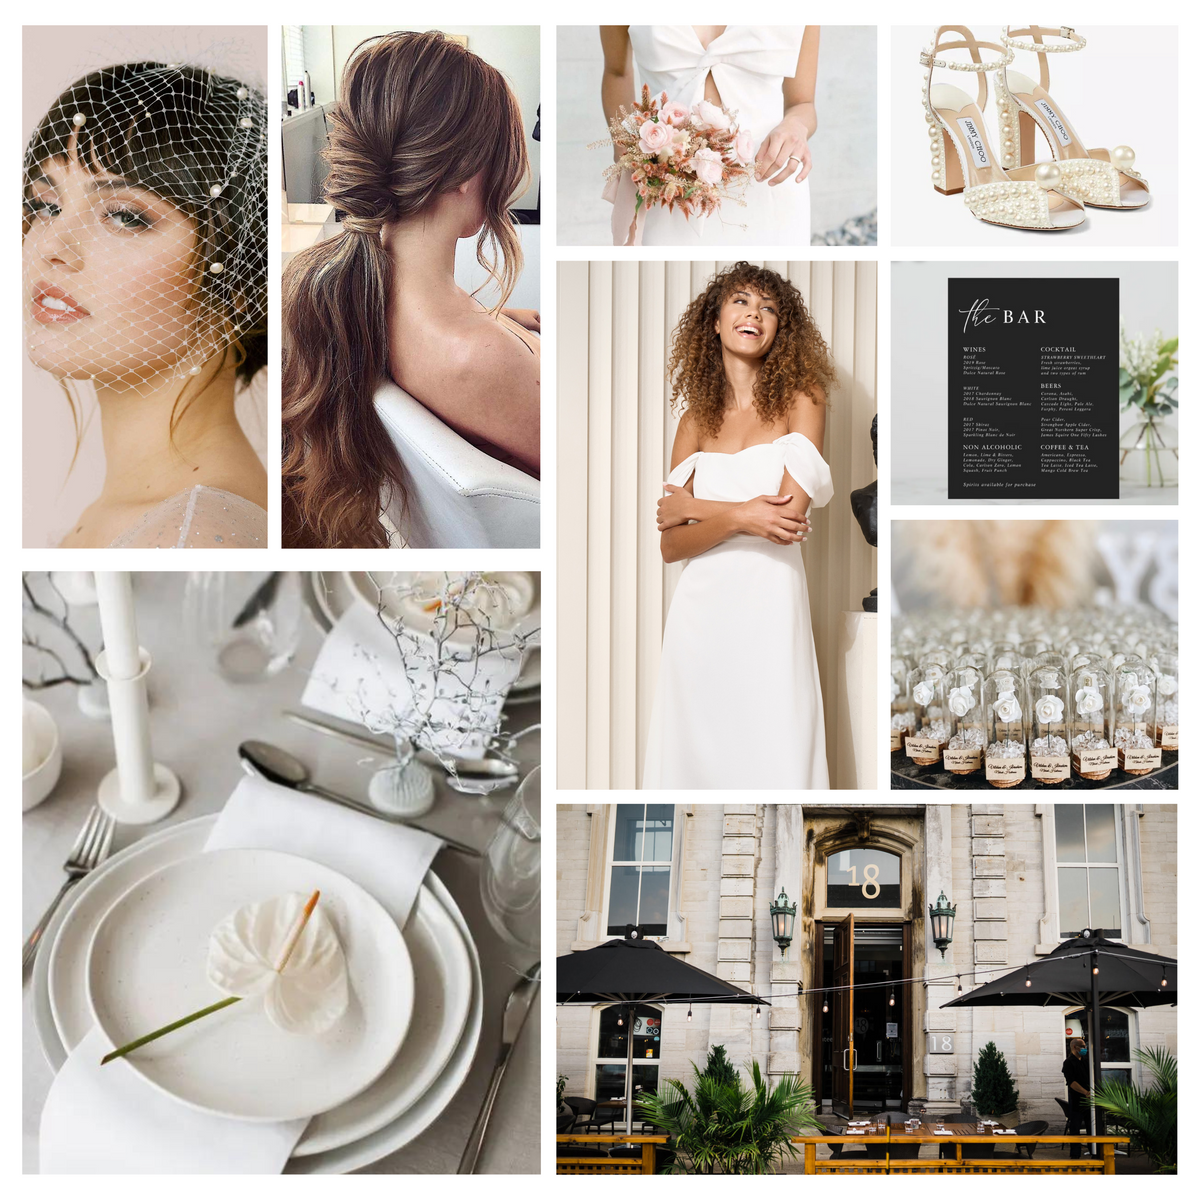 inspiration for an intimate and elegant downtown city brunch wedding reception